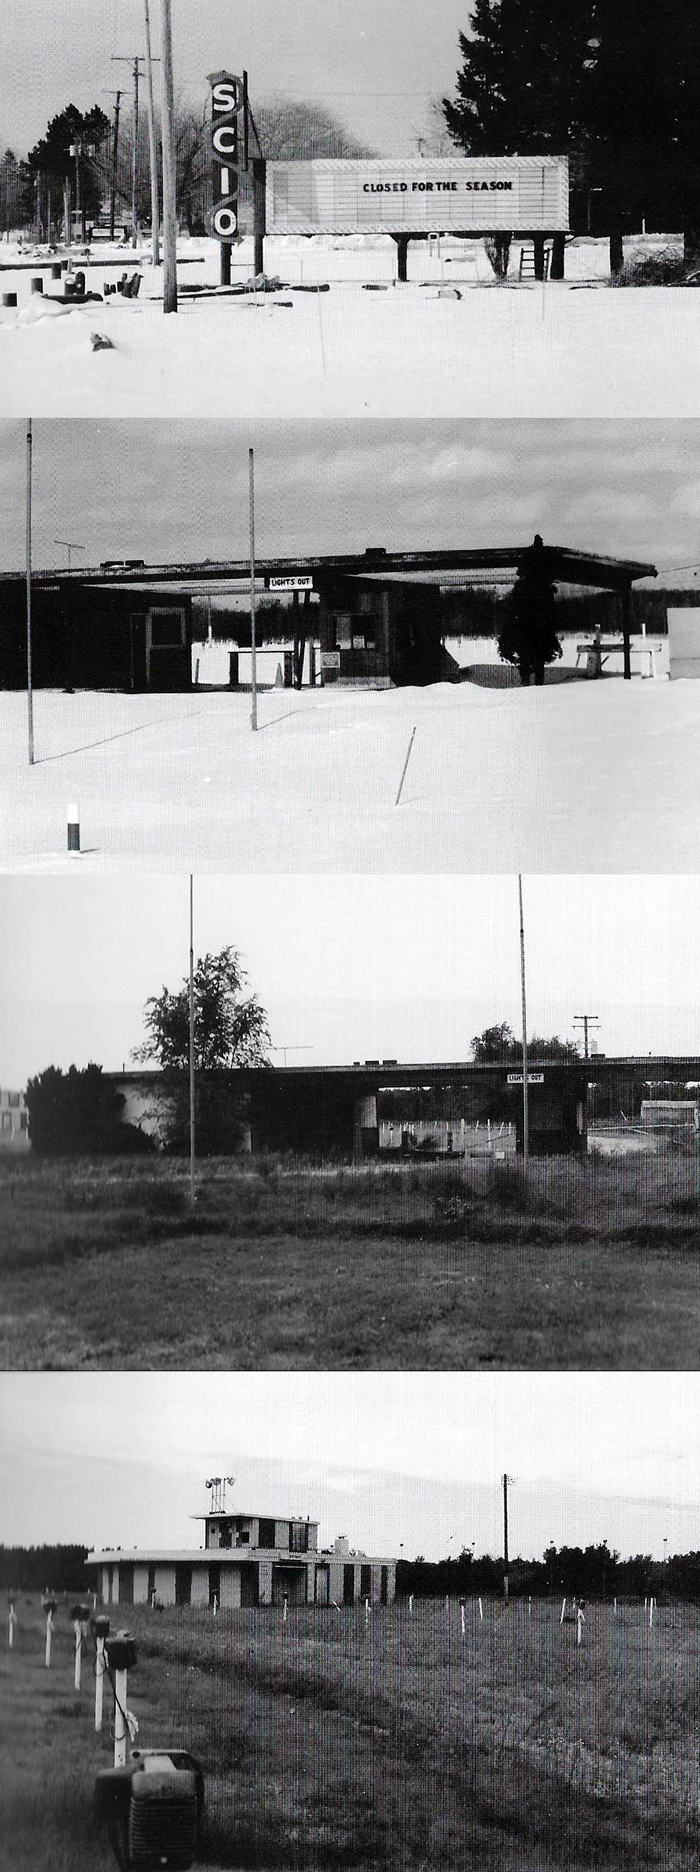 Scio Drive-In Theatre - Series Of Old Photos From Harry Skrdla